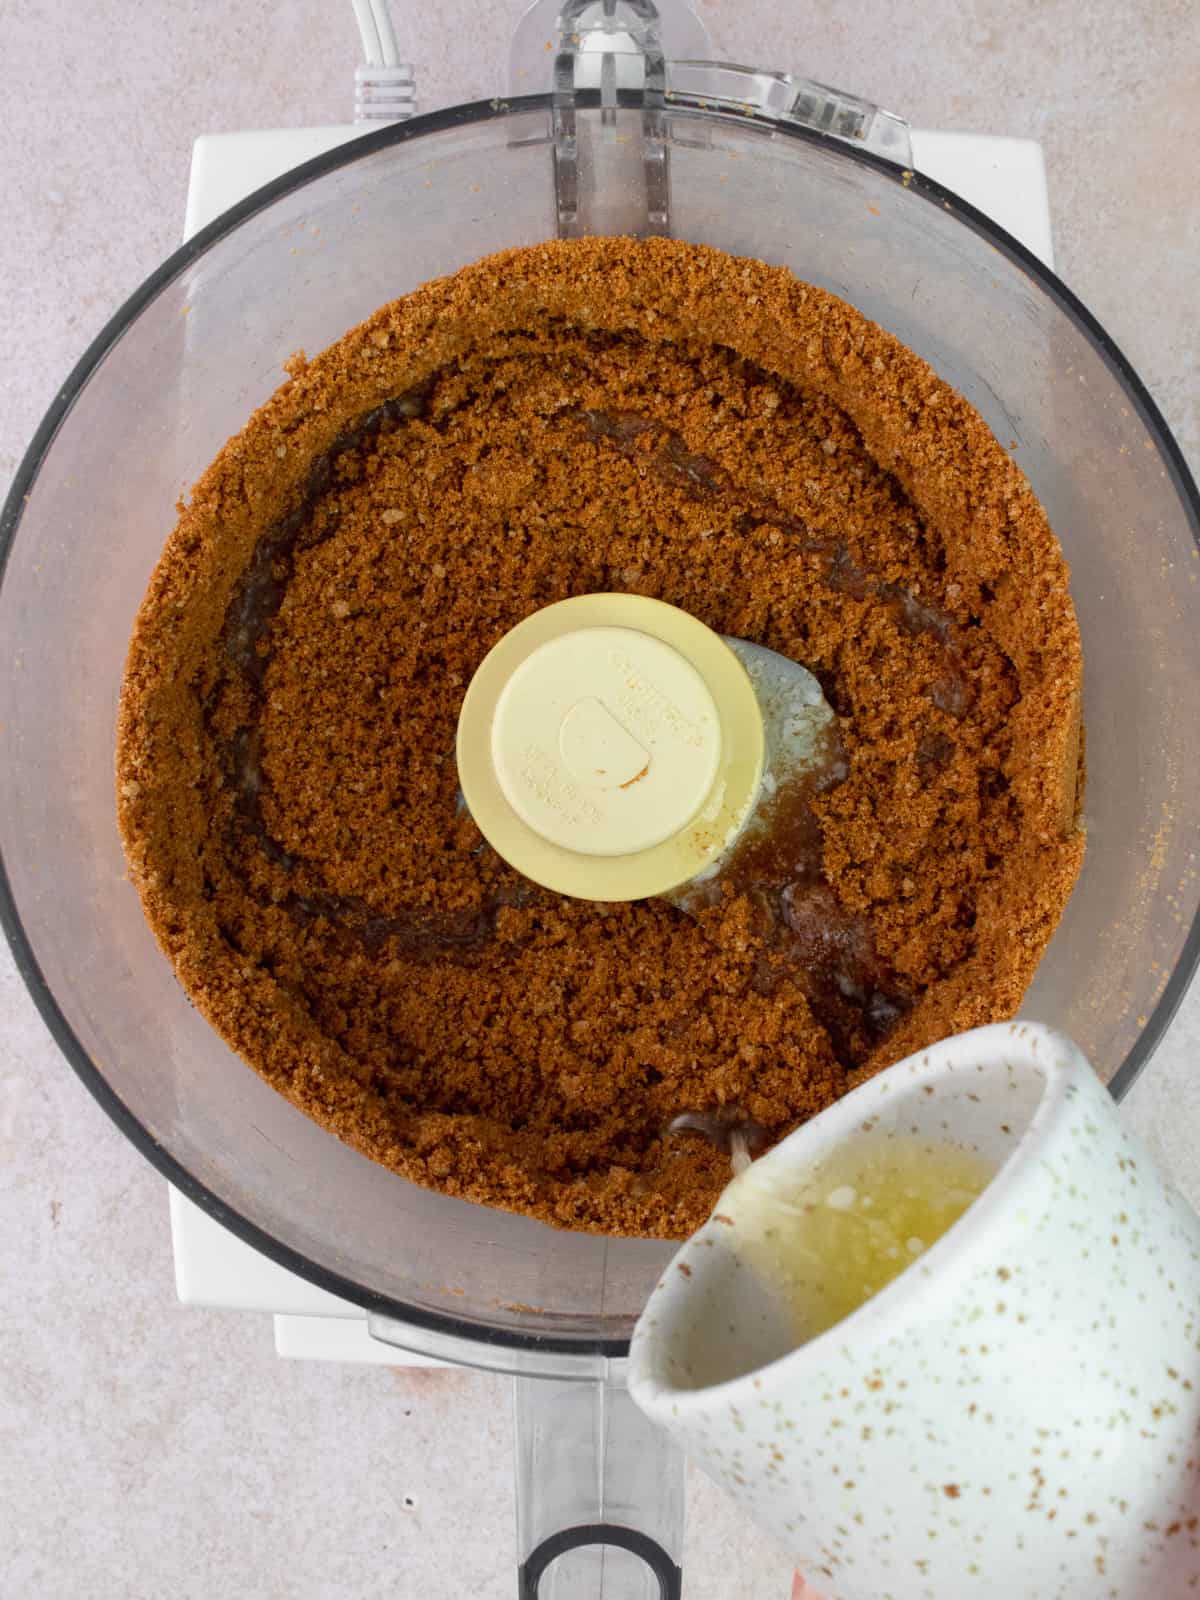 Melted butter is added to Biscoff cookies crumbs